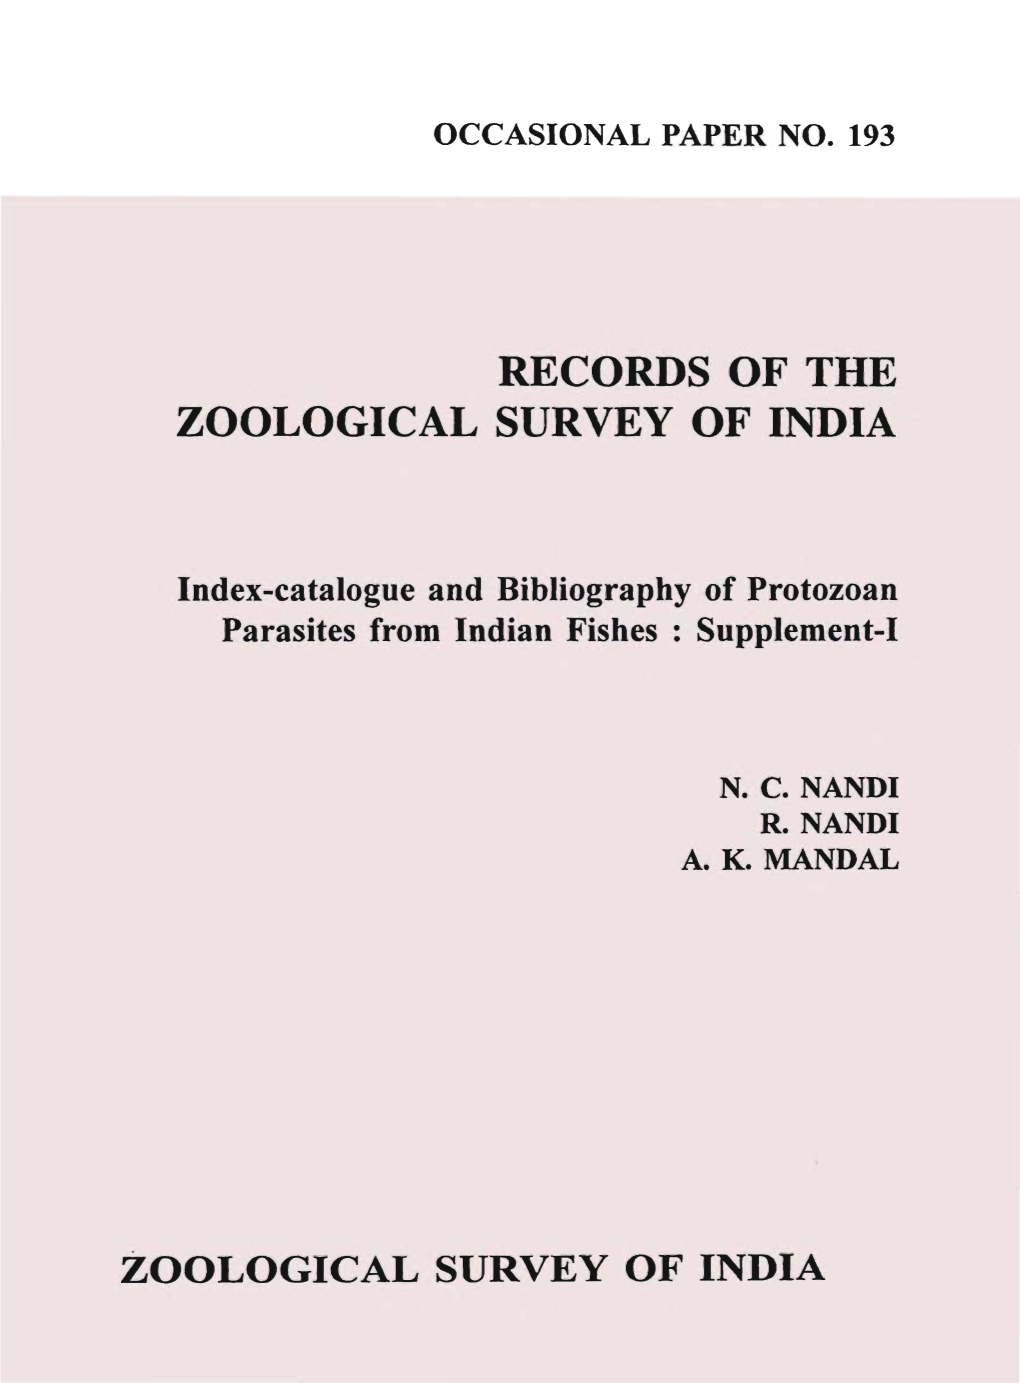 Index-Catalo'gue and Bibliog,R,Aphy of Protozoan Parasites from Ind-An Fishes: Supplement-I